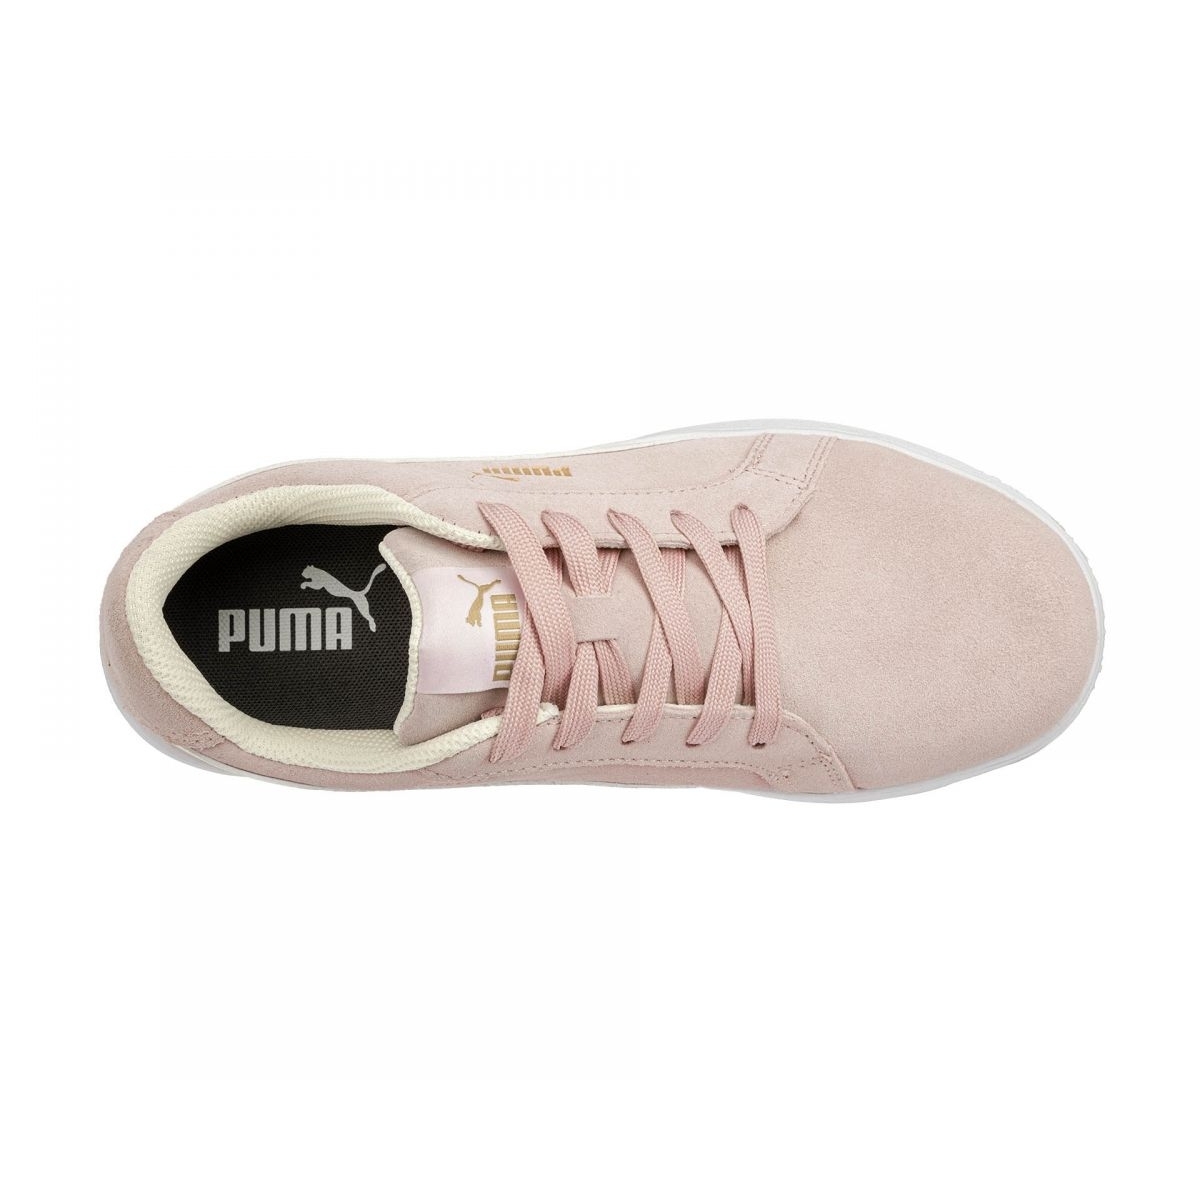 PUMA Safety Women's Iconic Low Composite Toe EH Work Shoes Pink Suede - 640145 PINK - PINK, 7